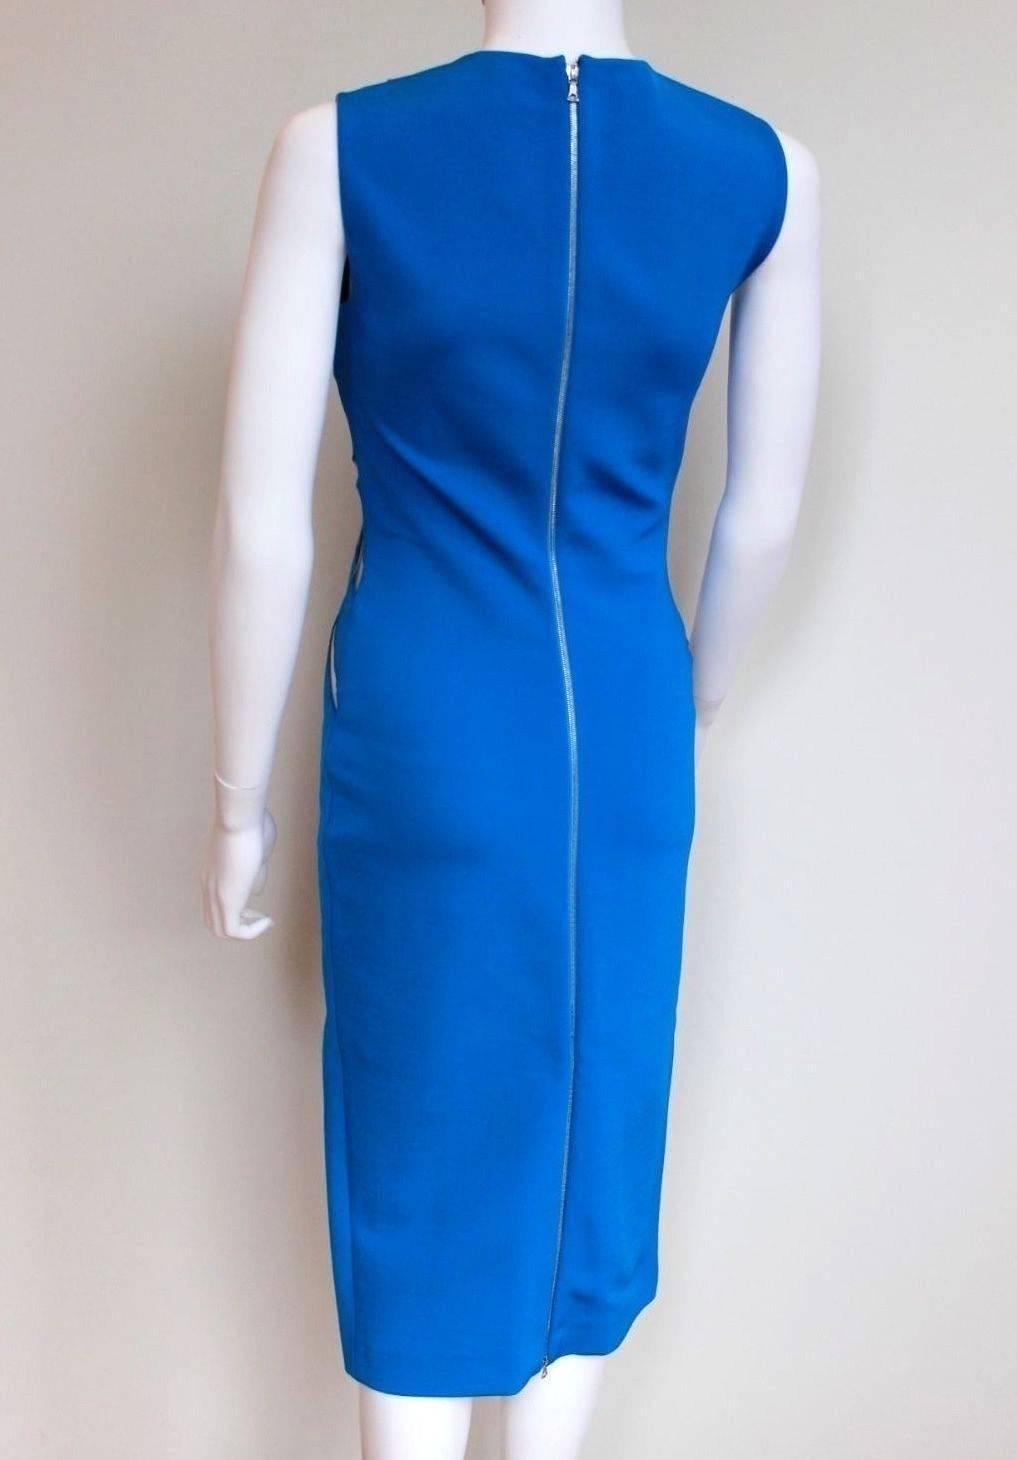 New David Koma Blue Mesh Insert Cut Out Dress uk 10  Statement blue dress from D In New Condition For Sale In London, GB